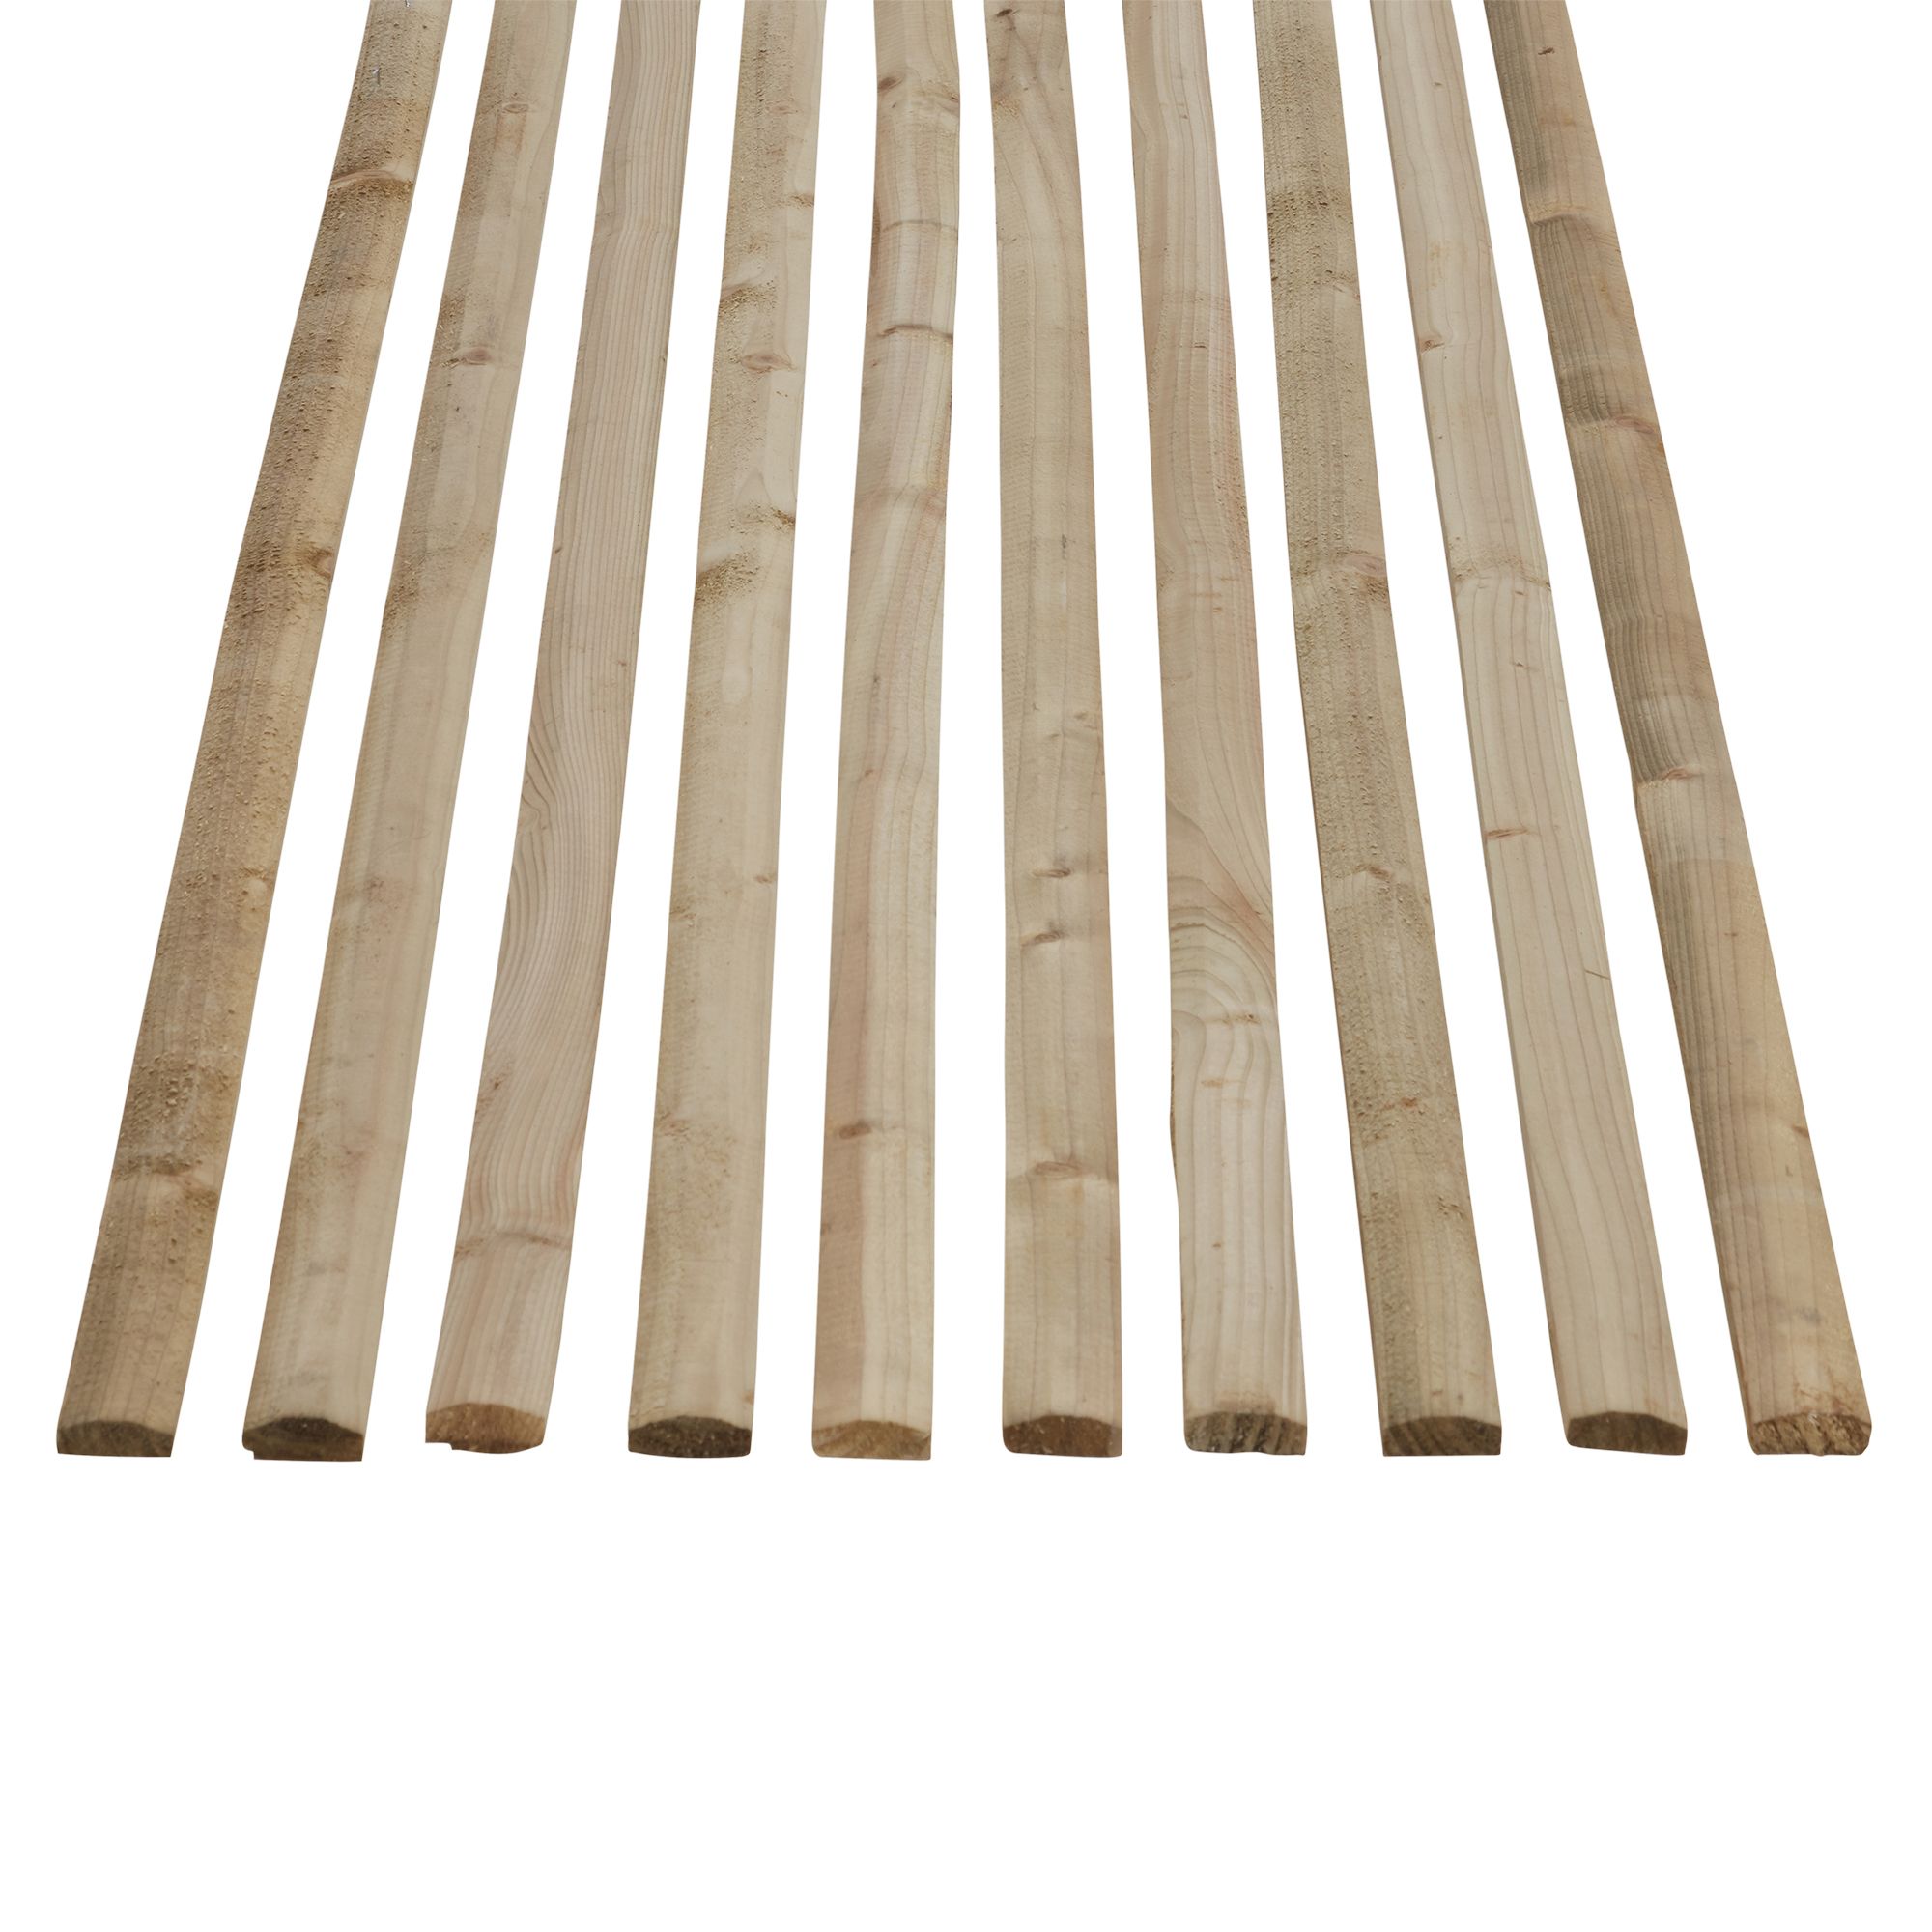 Forest Garden Dip treated Wood Trellis capping (L)1.83m